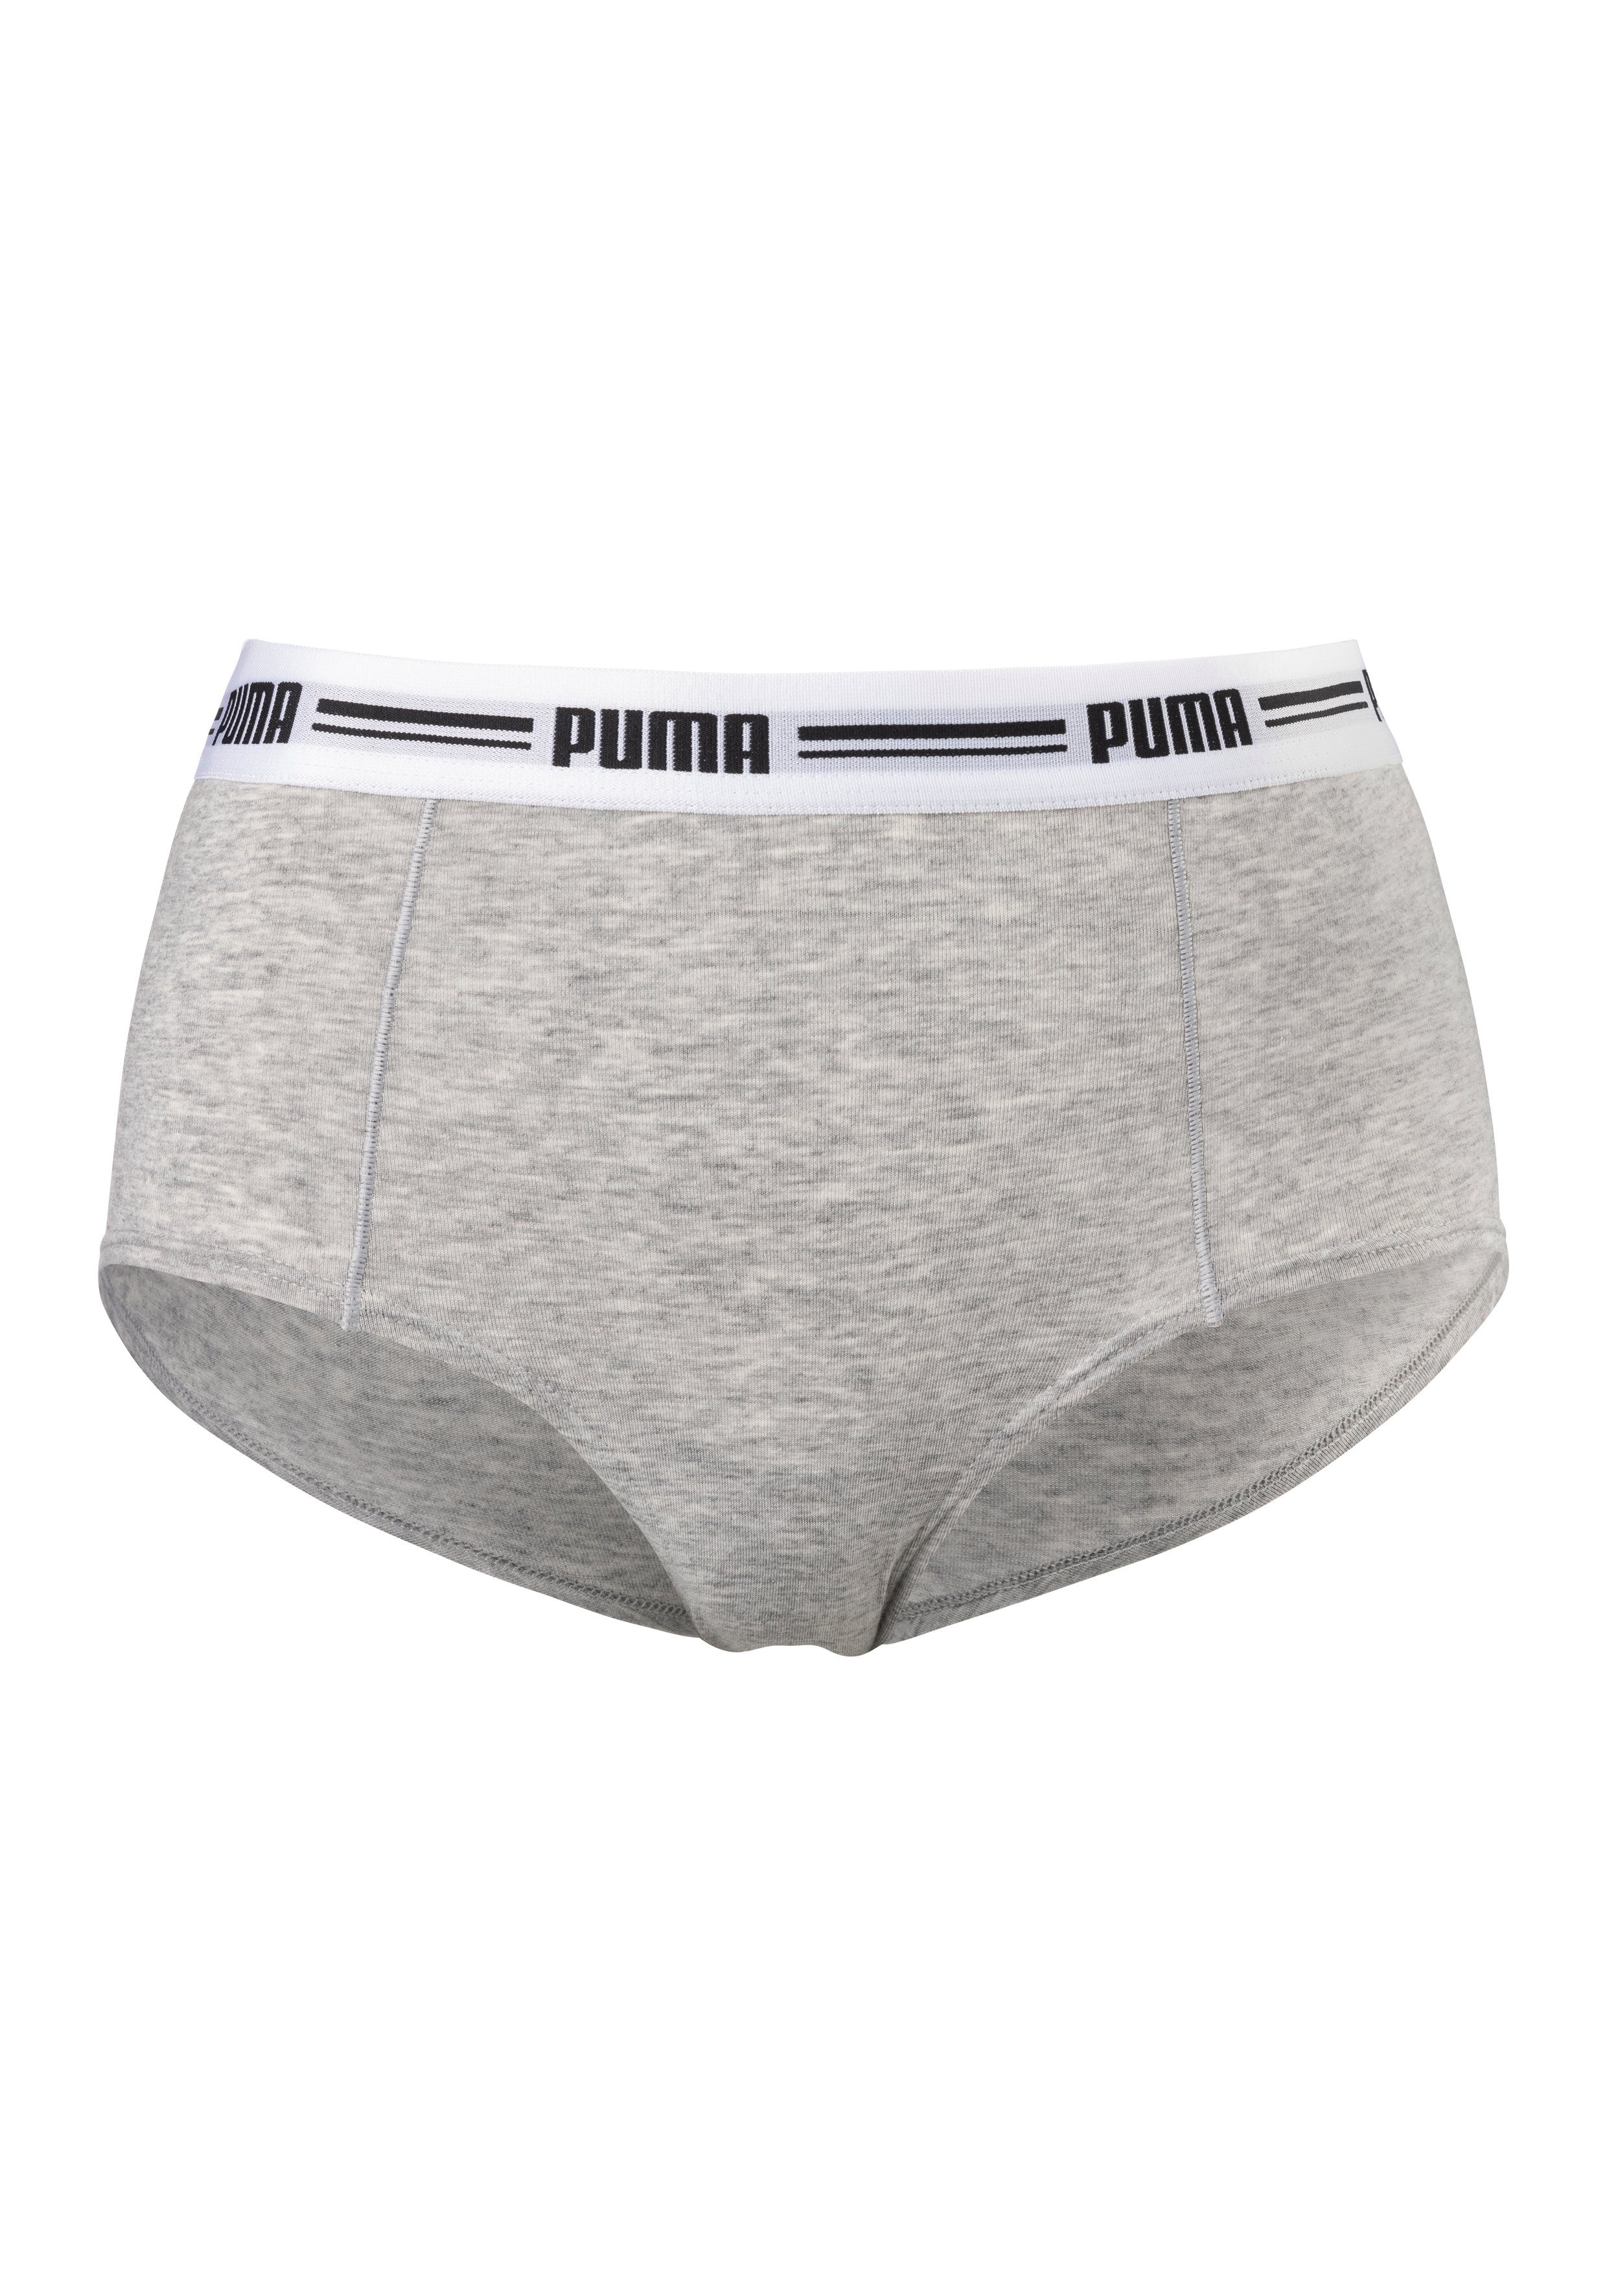 grau-meliert Panty Iconic PUMA 2-St) (Packung,